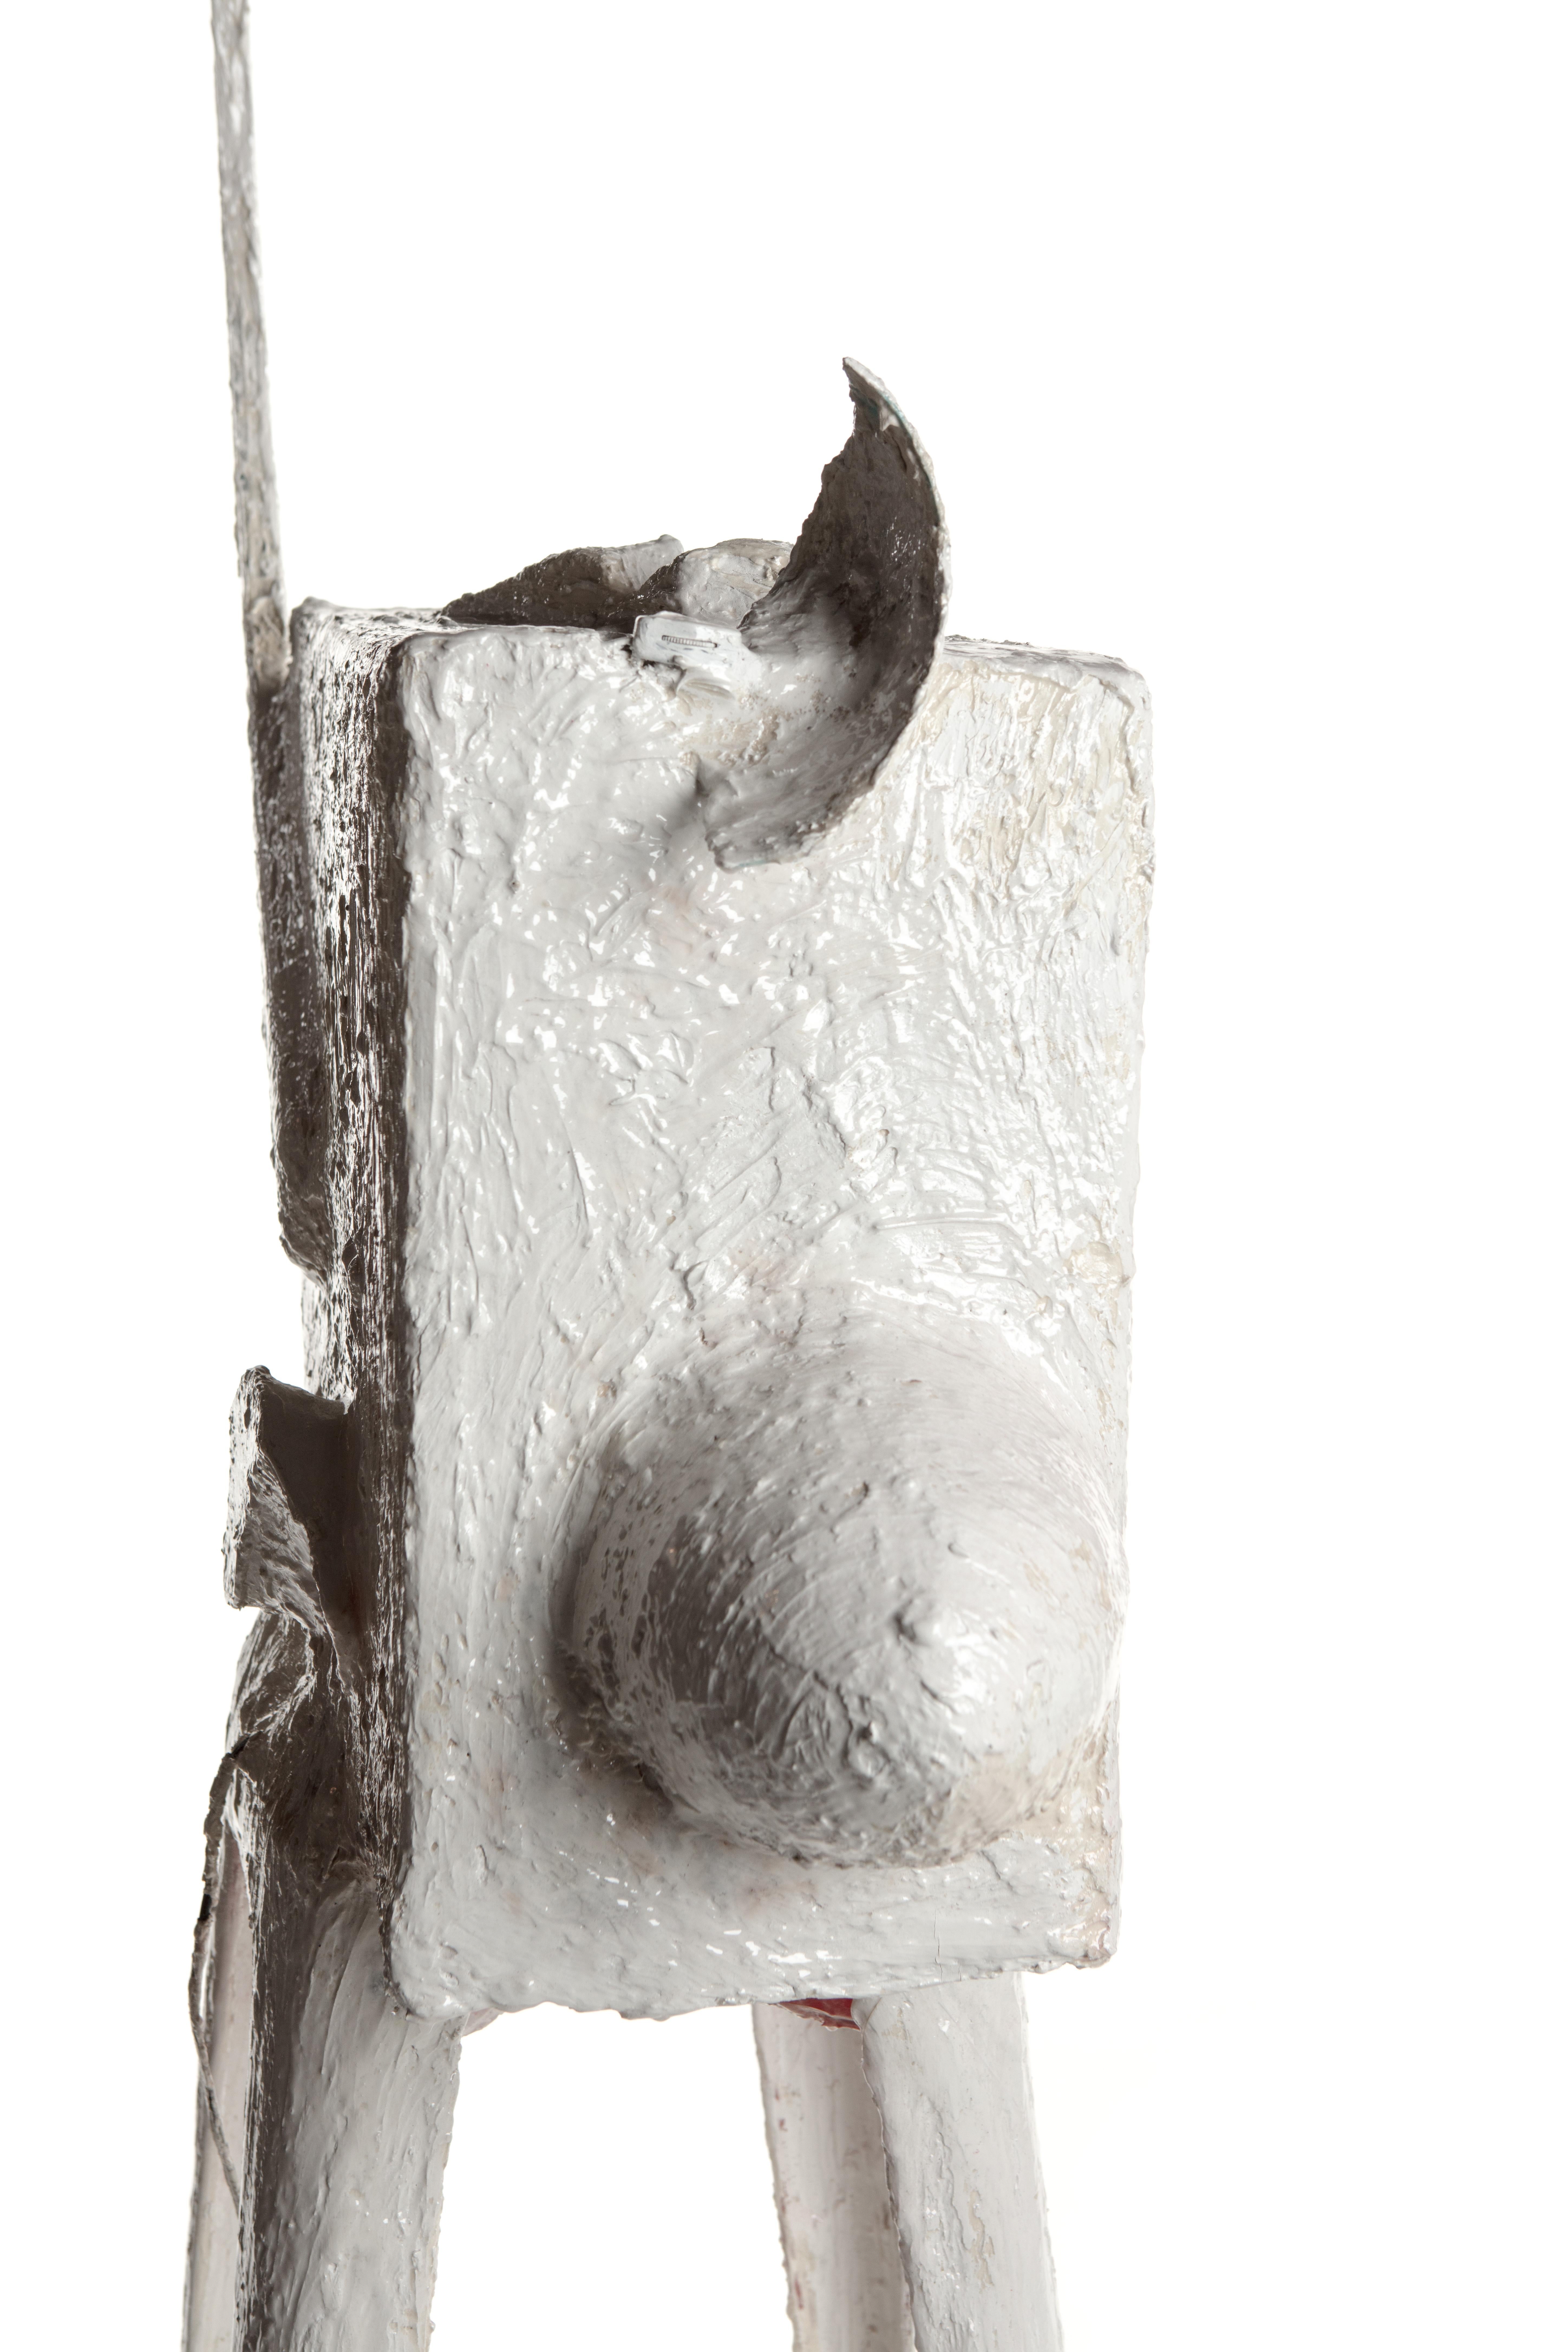 Sculptural White and Red Plaster Bar, 21st Century by Mattia Biagi For Sale 11